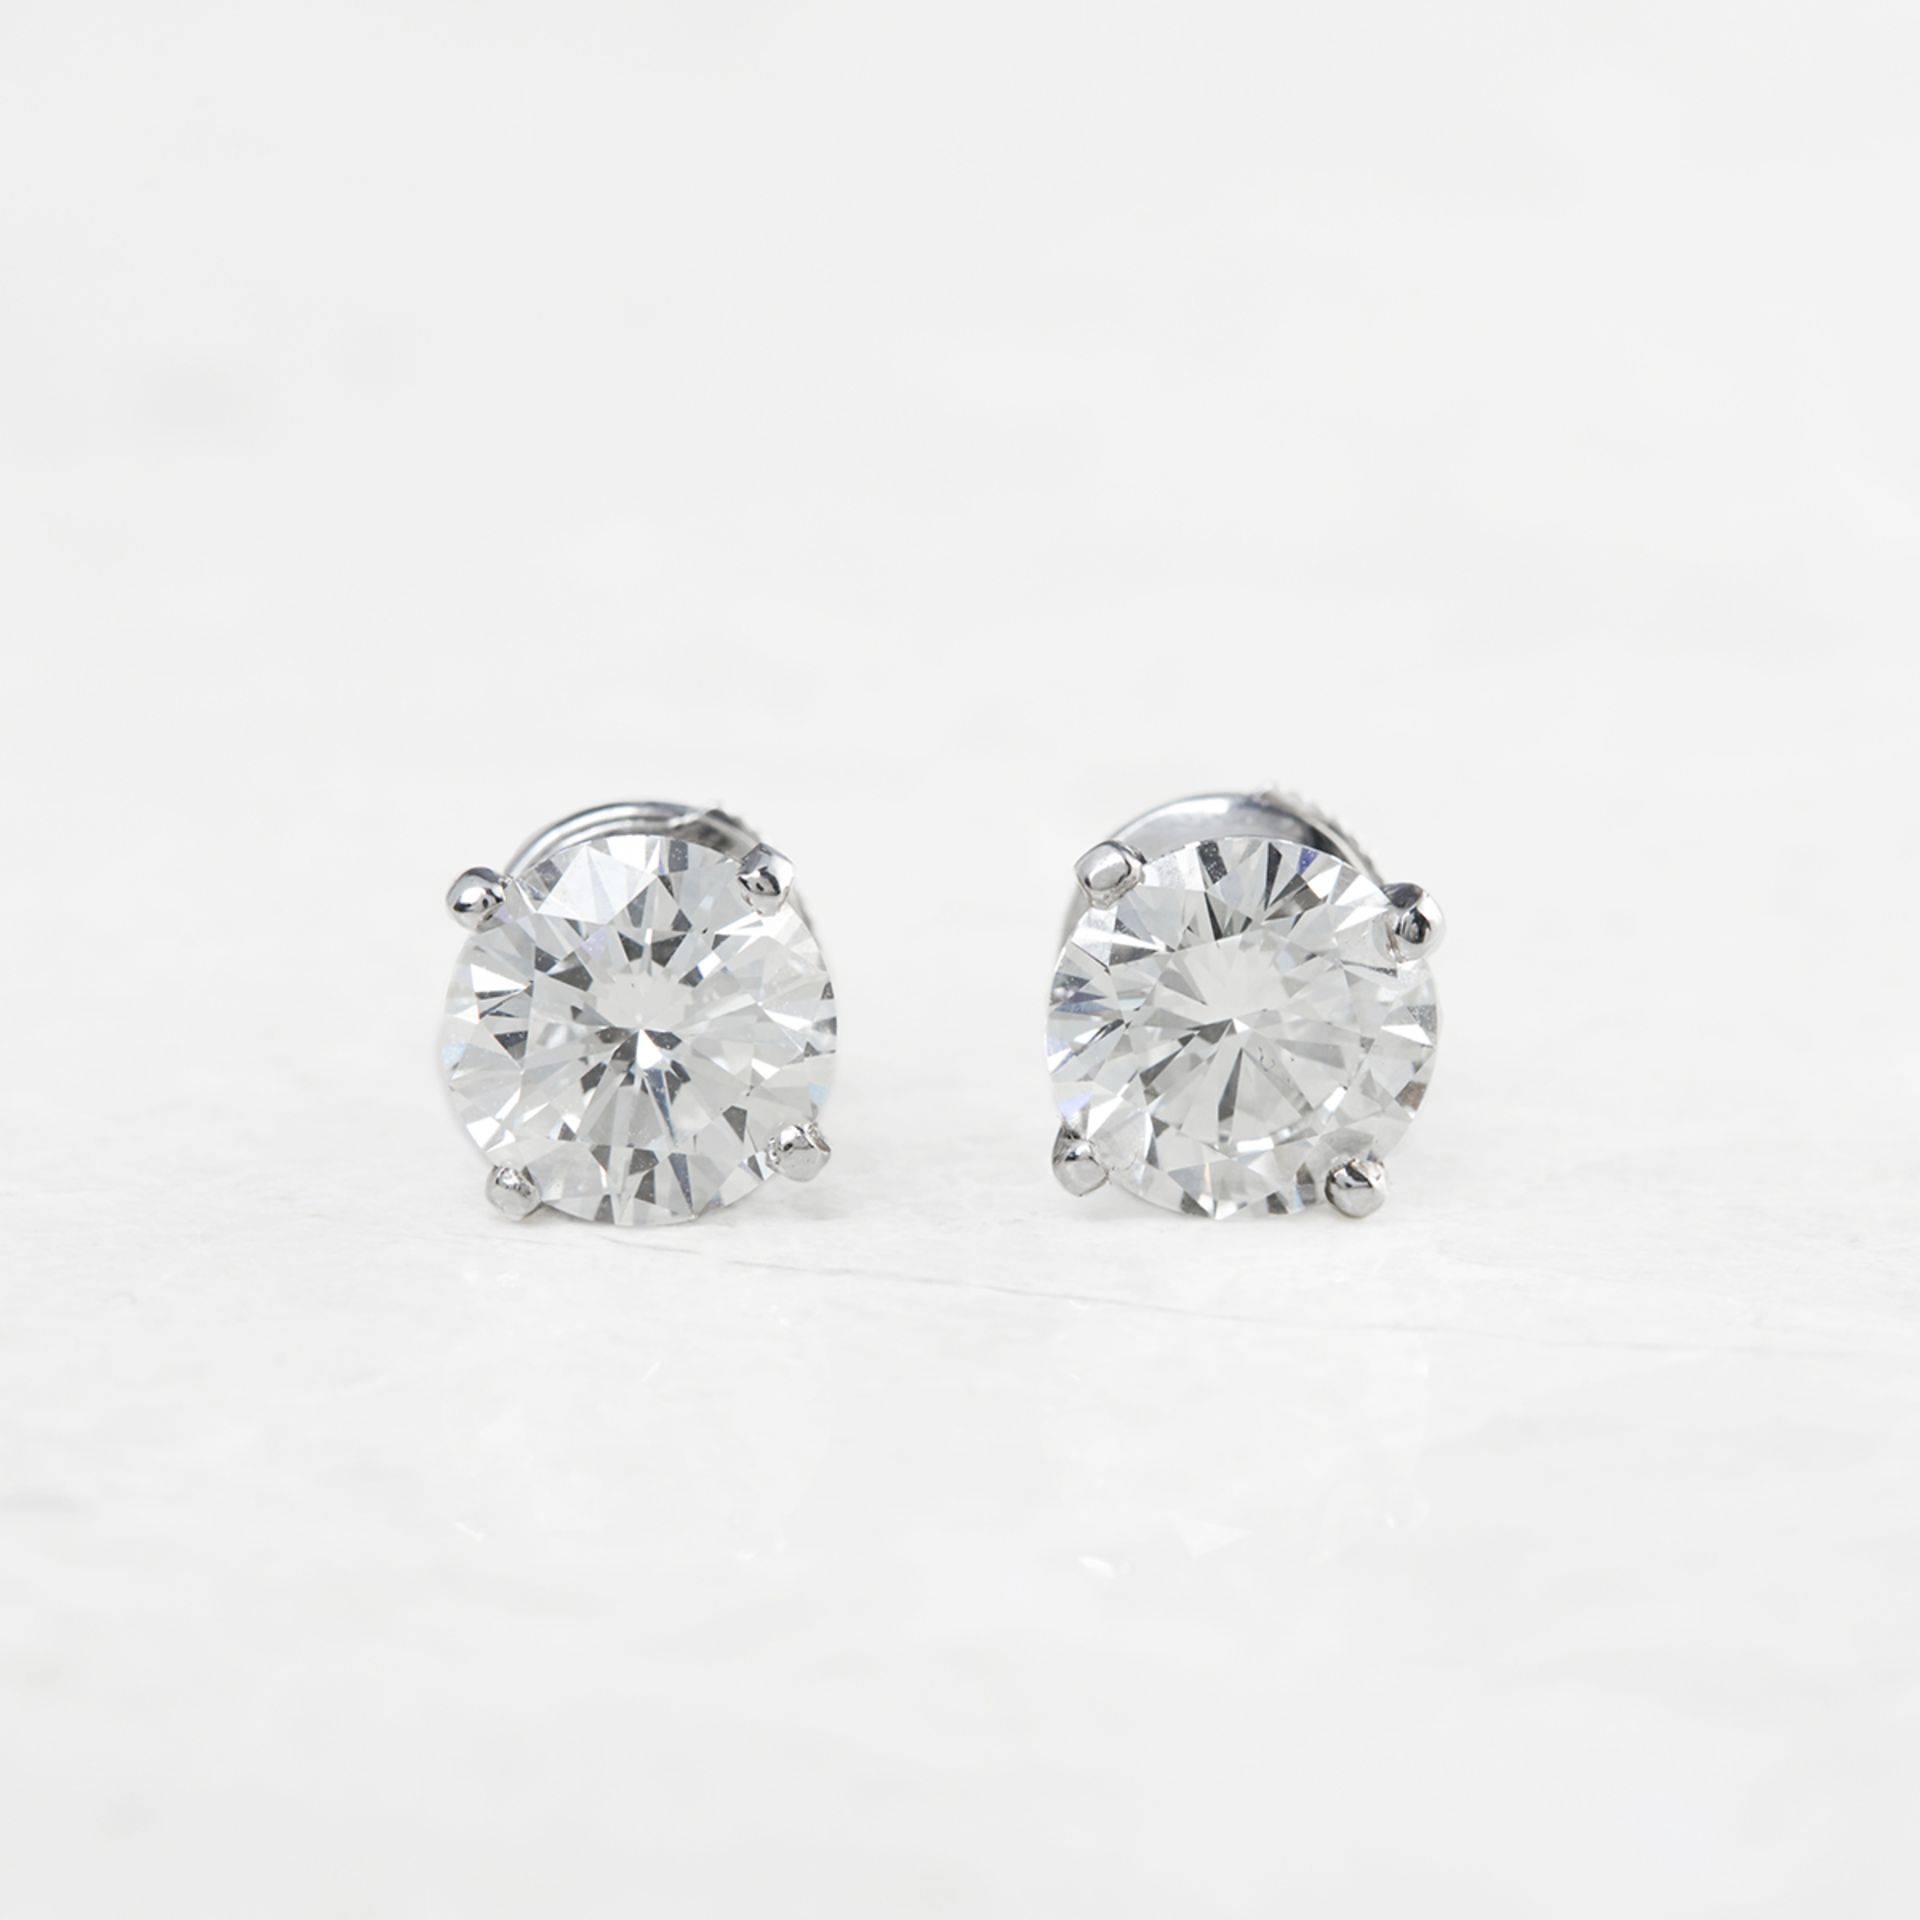 Cartier Platinum Round Brilliant Cut 4.03ct Diamond Stud Earrings with GIA & Cartier Certificates - Image 2 of 12